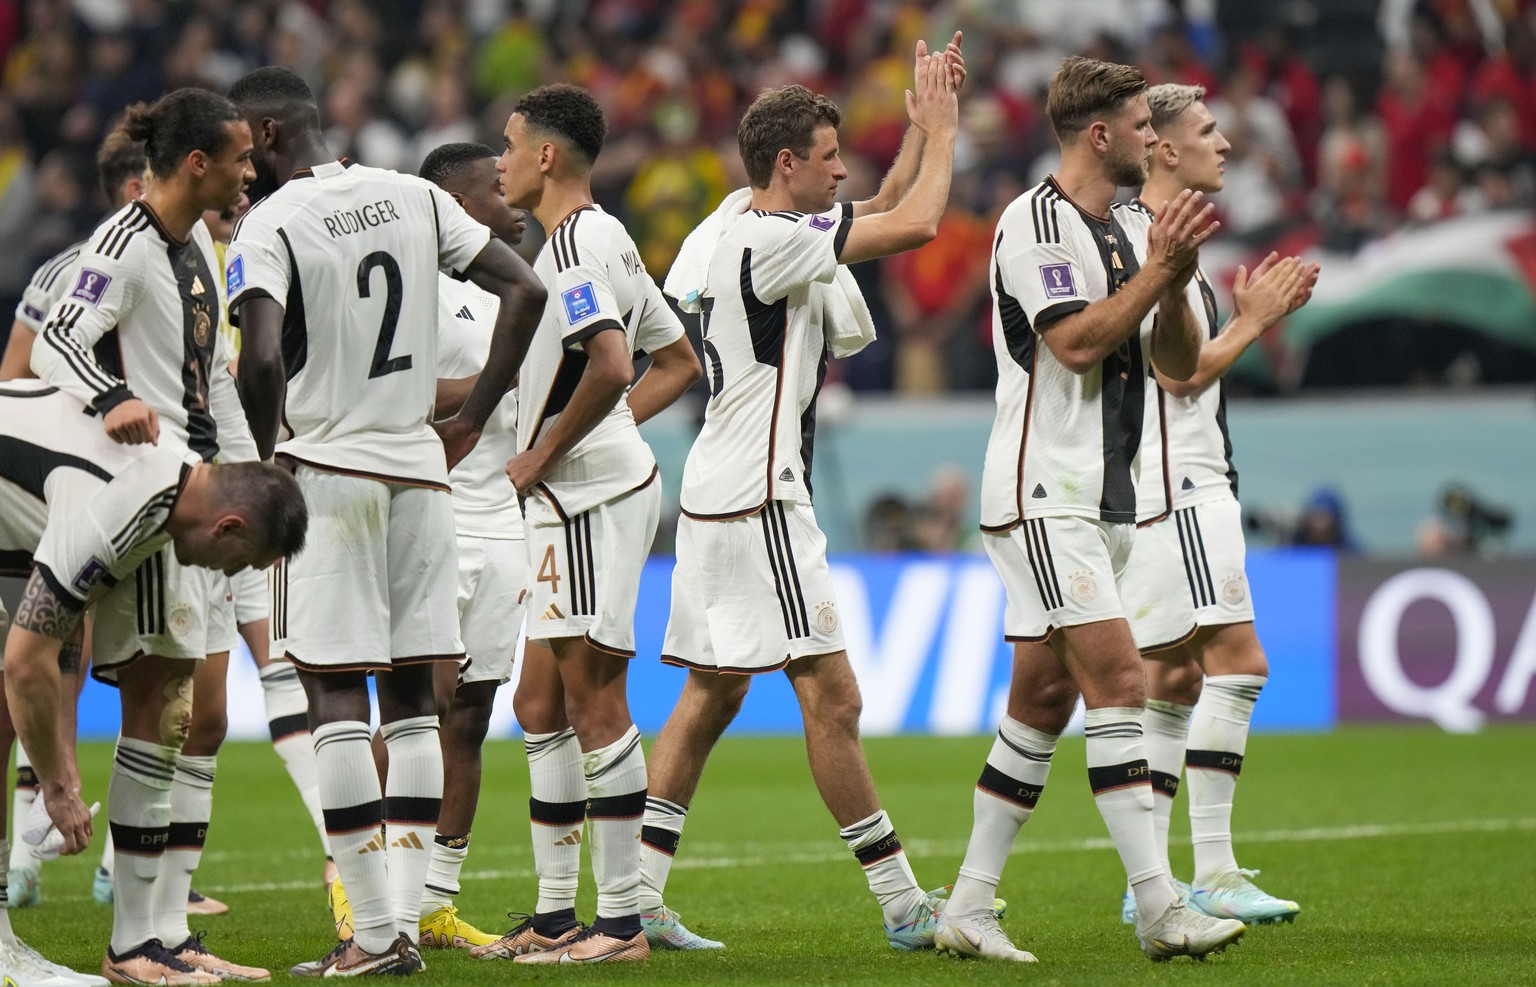 Germany players celebrate at the end of the World Cup group E soccer match between Spain and Germany, at the Al Bayt Stadium in Al Khor , Qatar, Sunday, Nov. 27, 2022. (AP Photo/Luca Bruno)